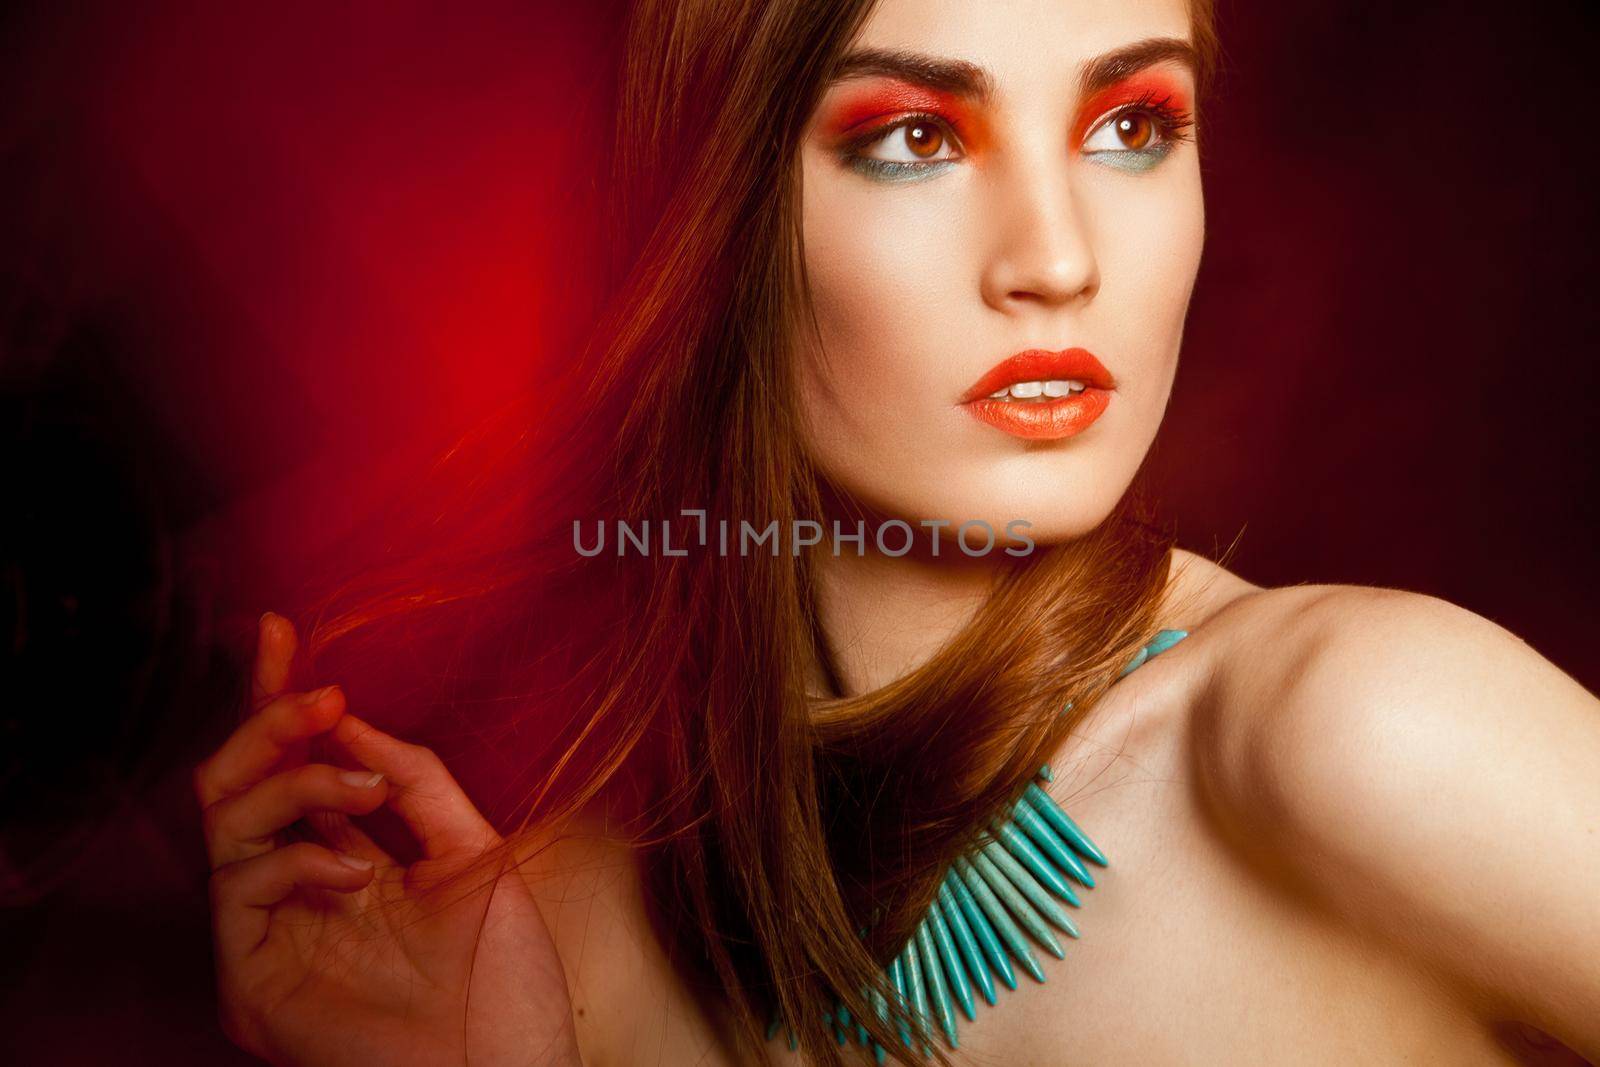 Beautyful woman with creative make-up over dark background